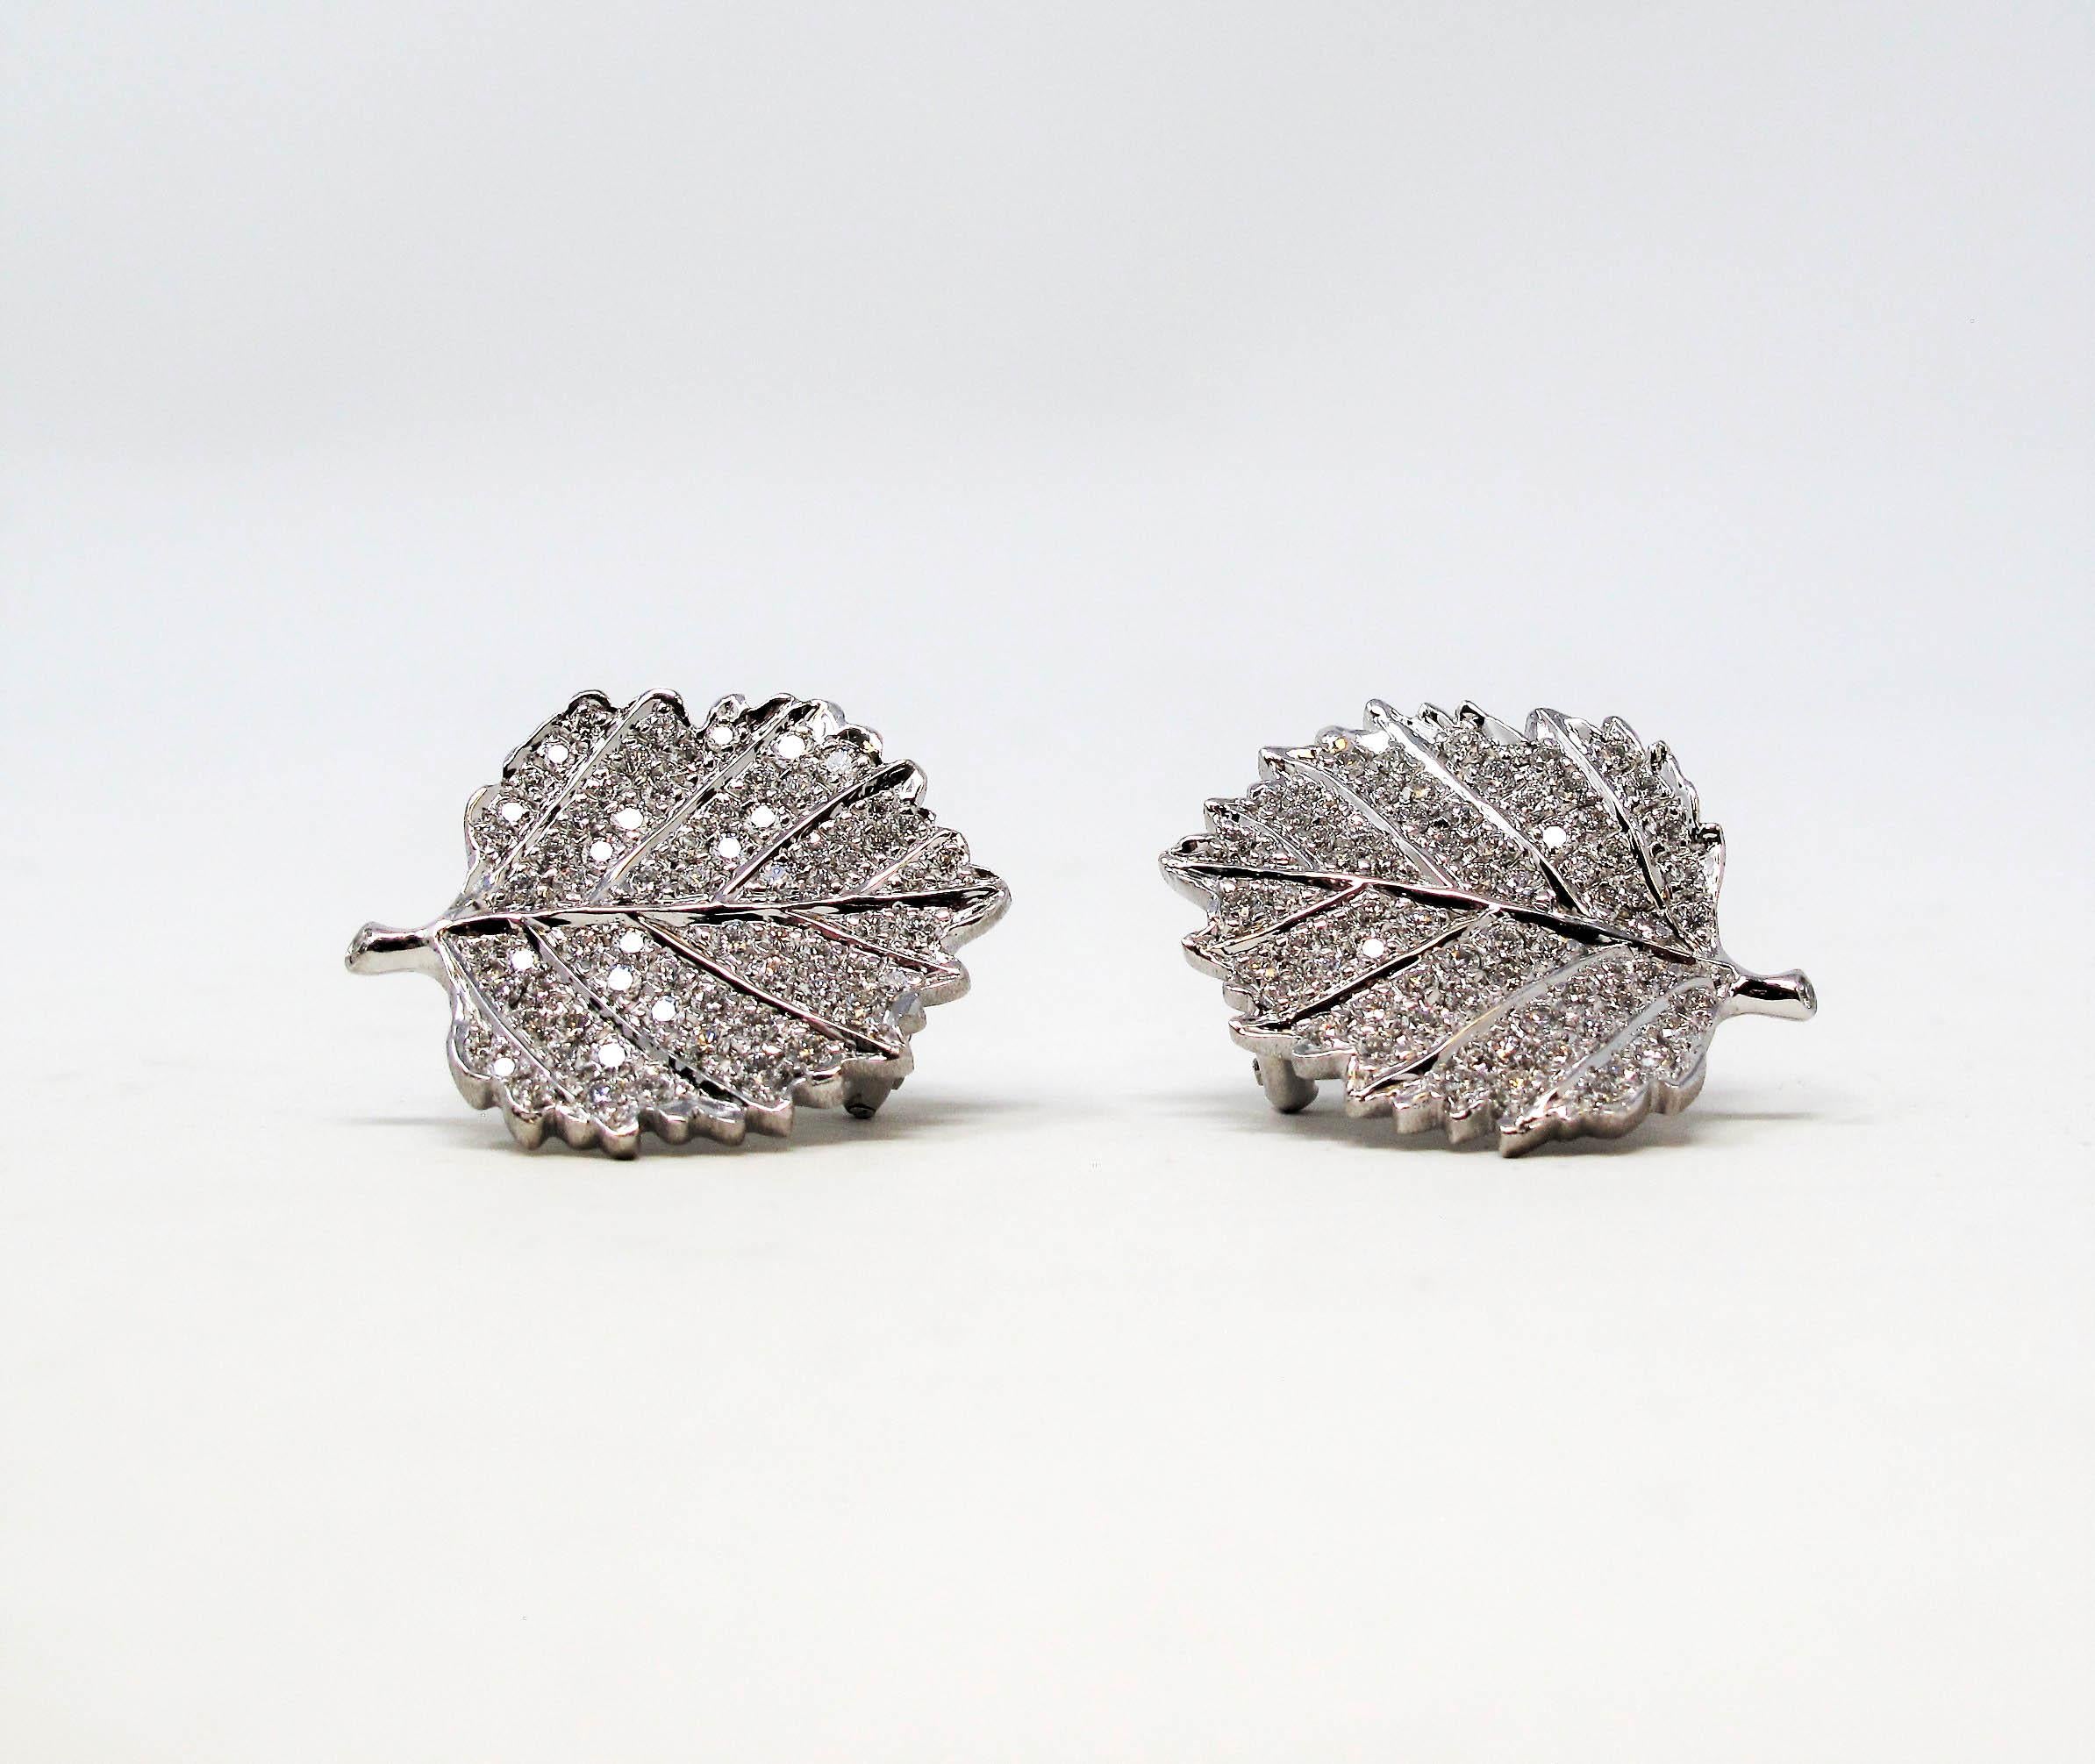 Stunningly sparkly pave diamond and 18 karat gold leaf earrings. These elegant botanical earrings are wonderfully detailed with exquisite craftsmanship. The glittering diamonds really elevate the pair, allowing them to truly radiate on the ear. 